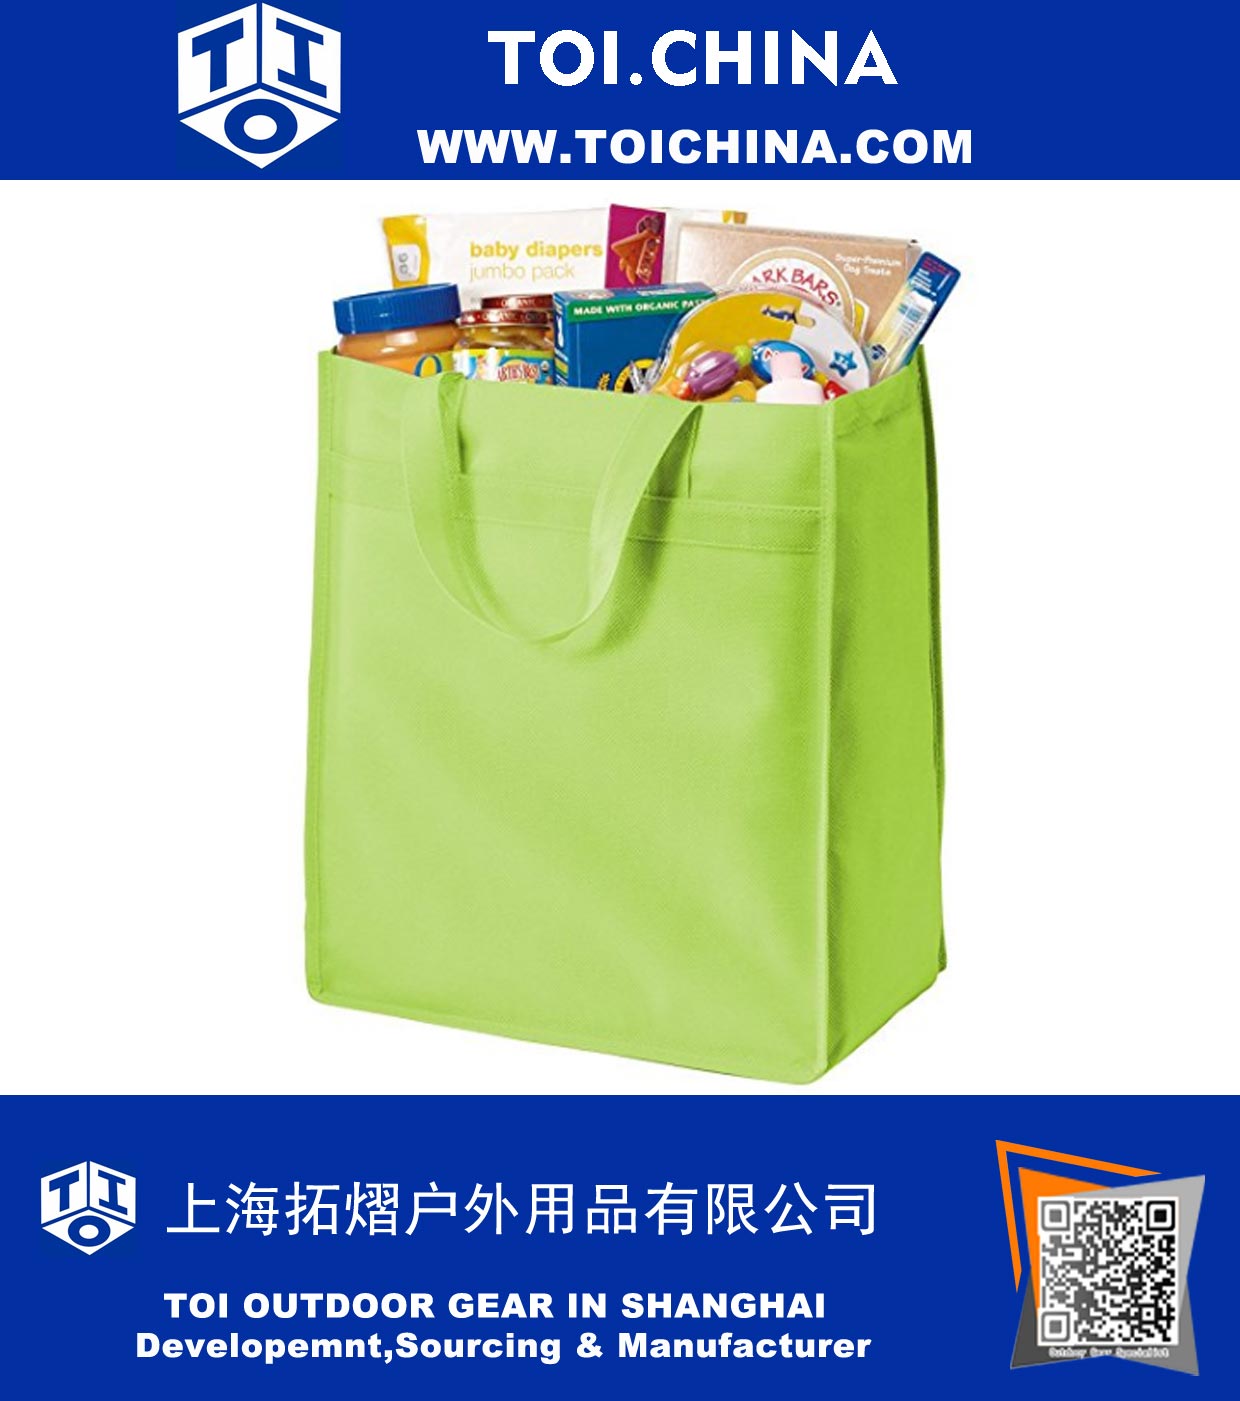 Polypropylene Grocery Shopping Tote Bags